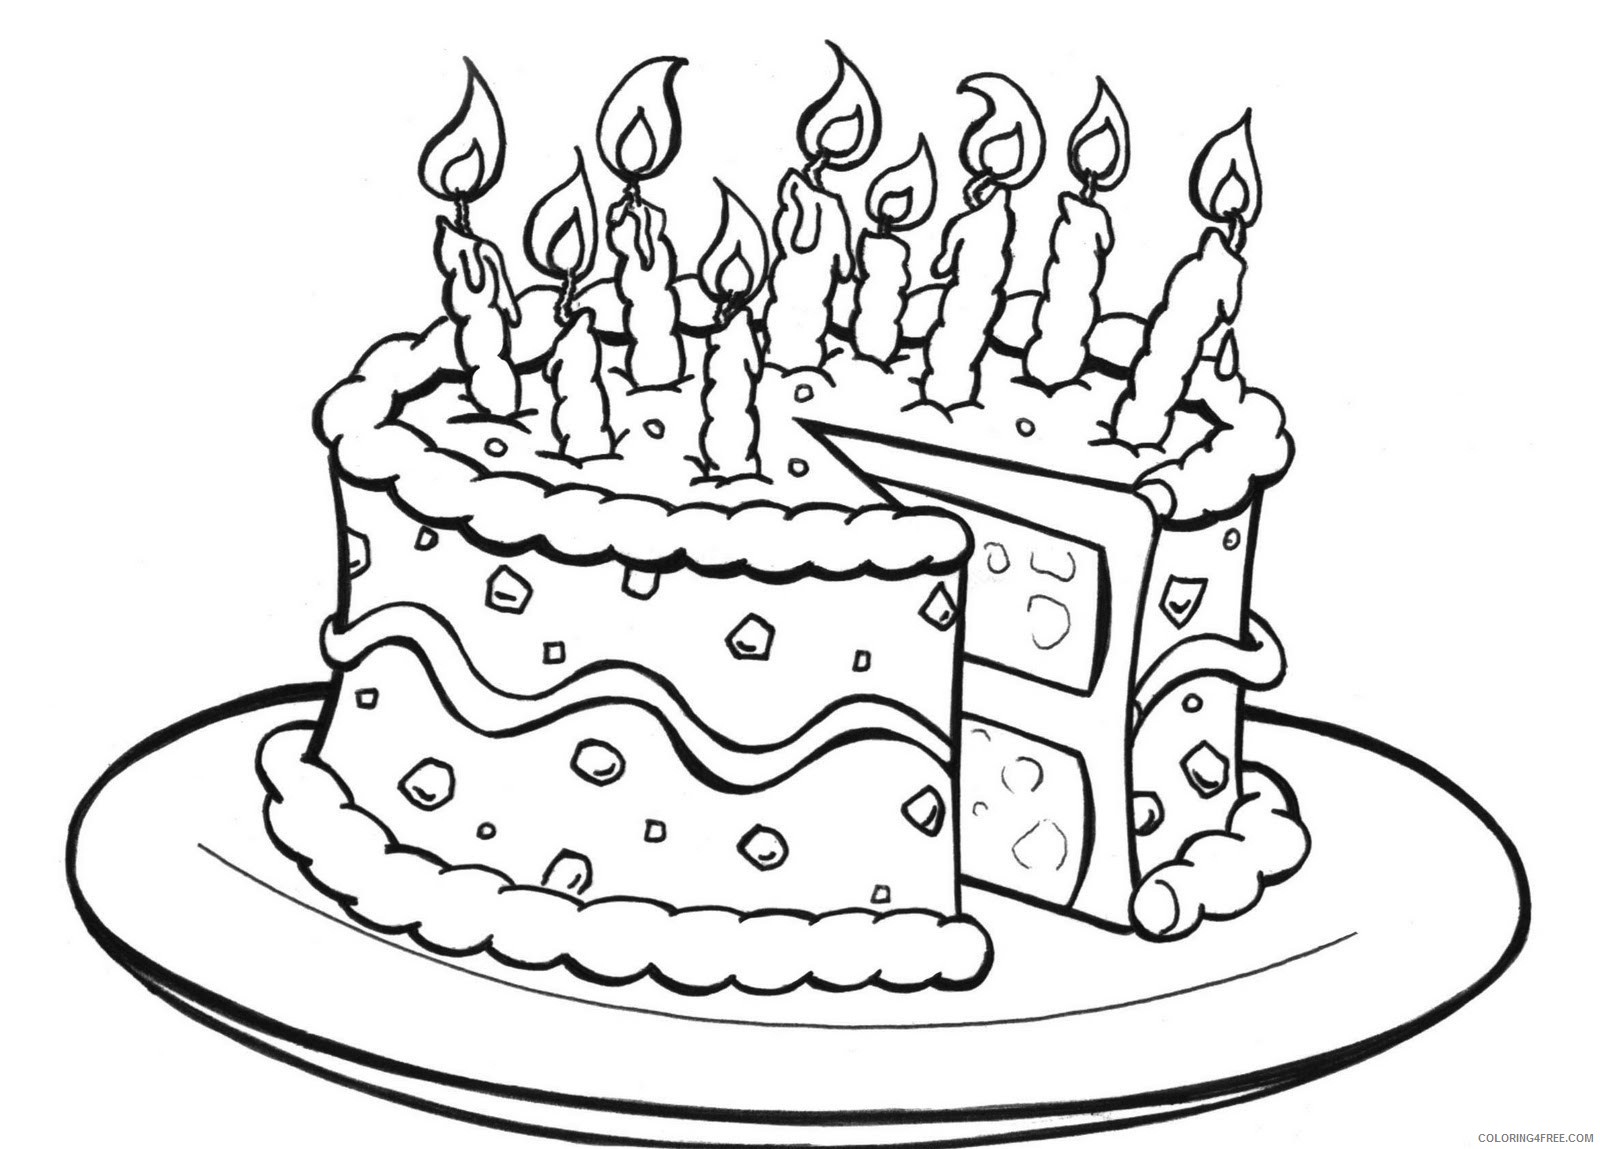 birthday cake coloring pages on plate Coloring4free